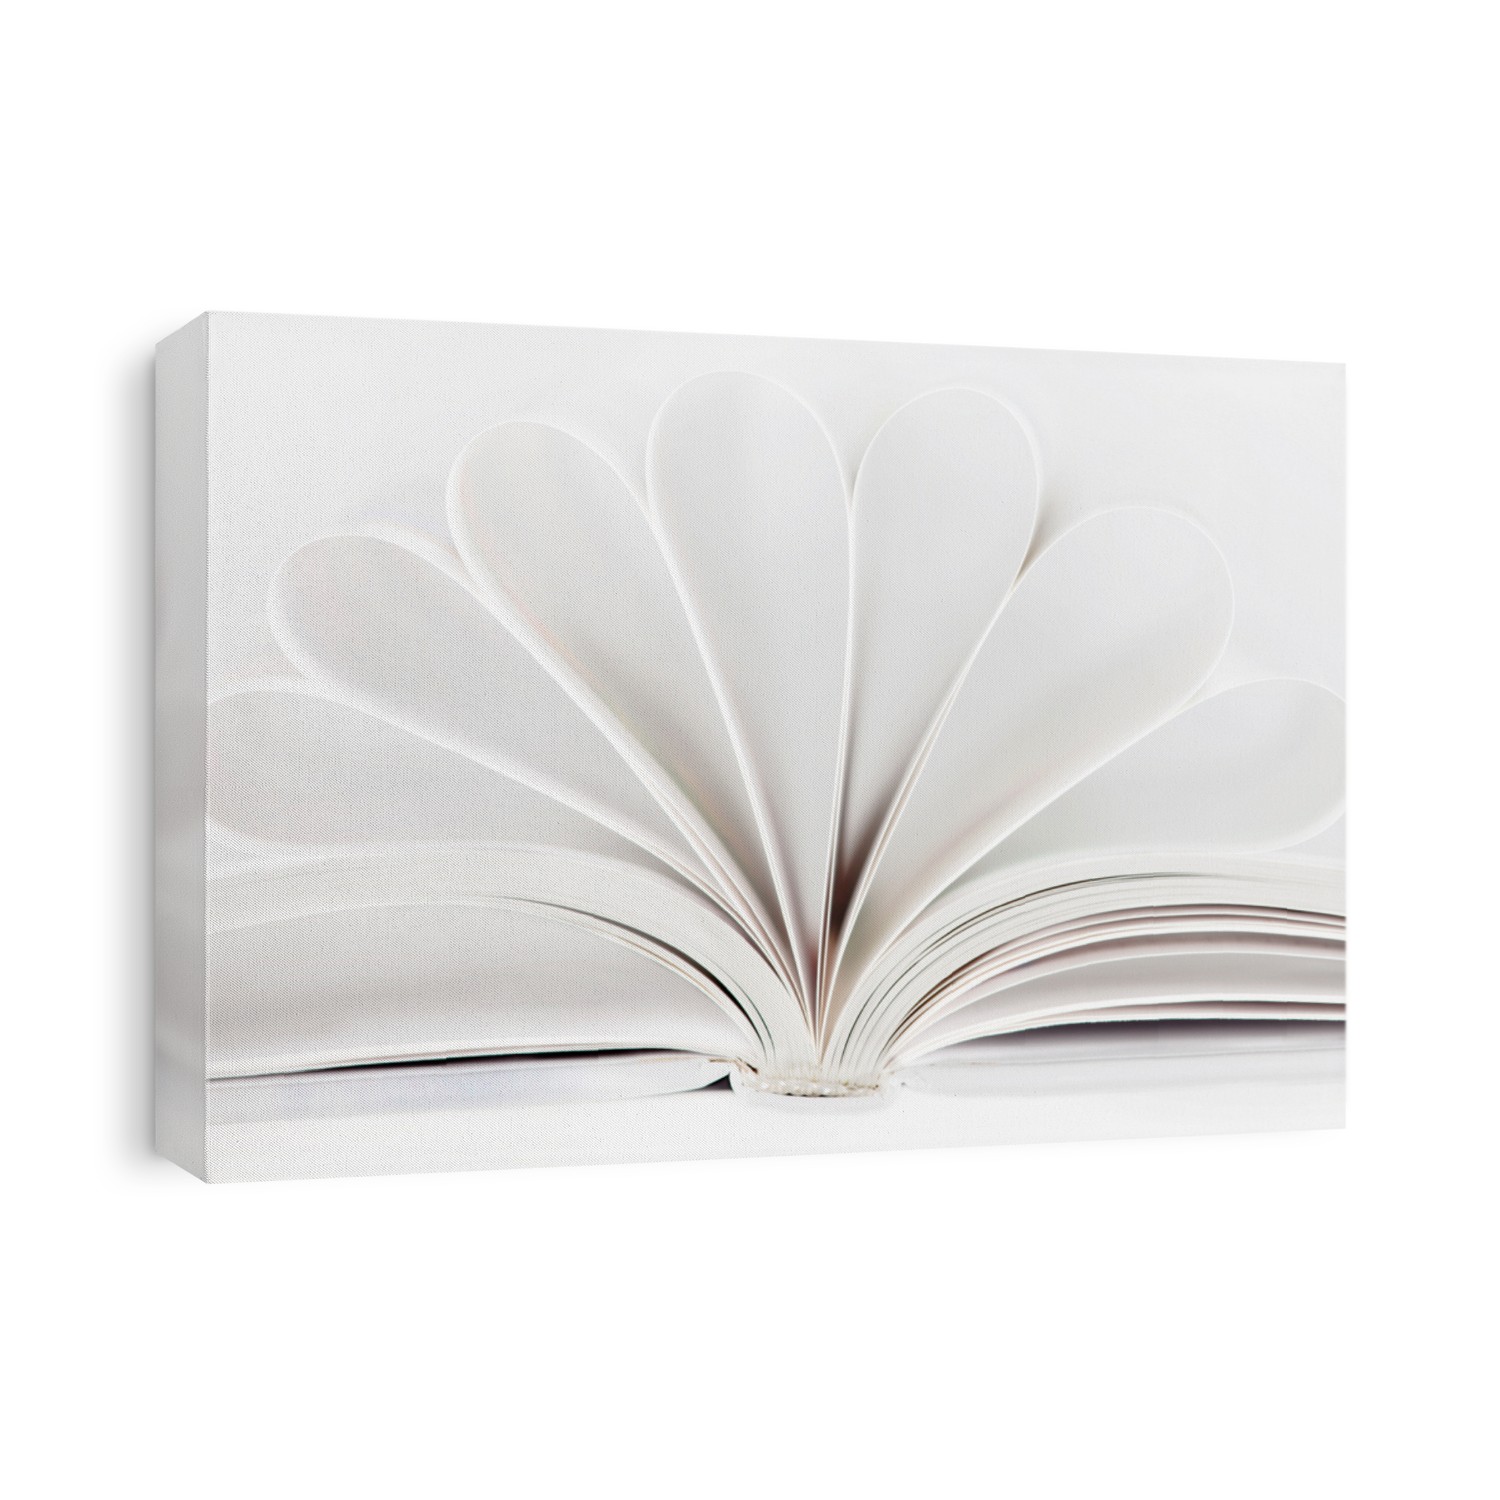 Abstract book on white background